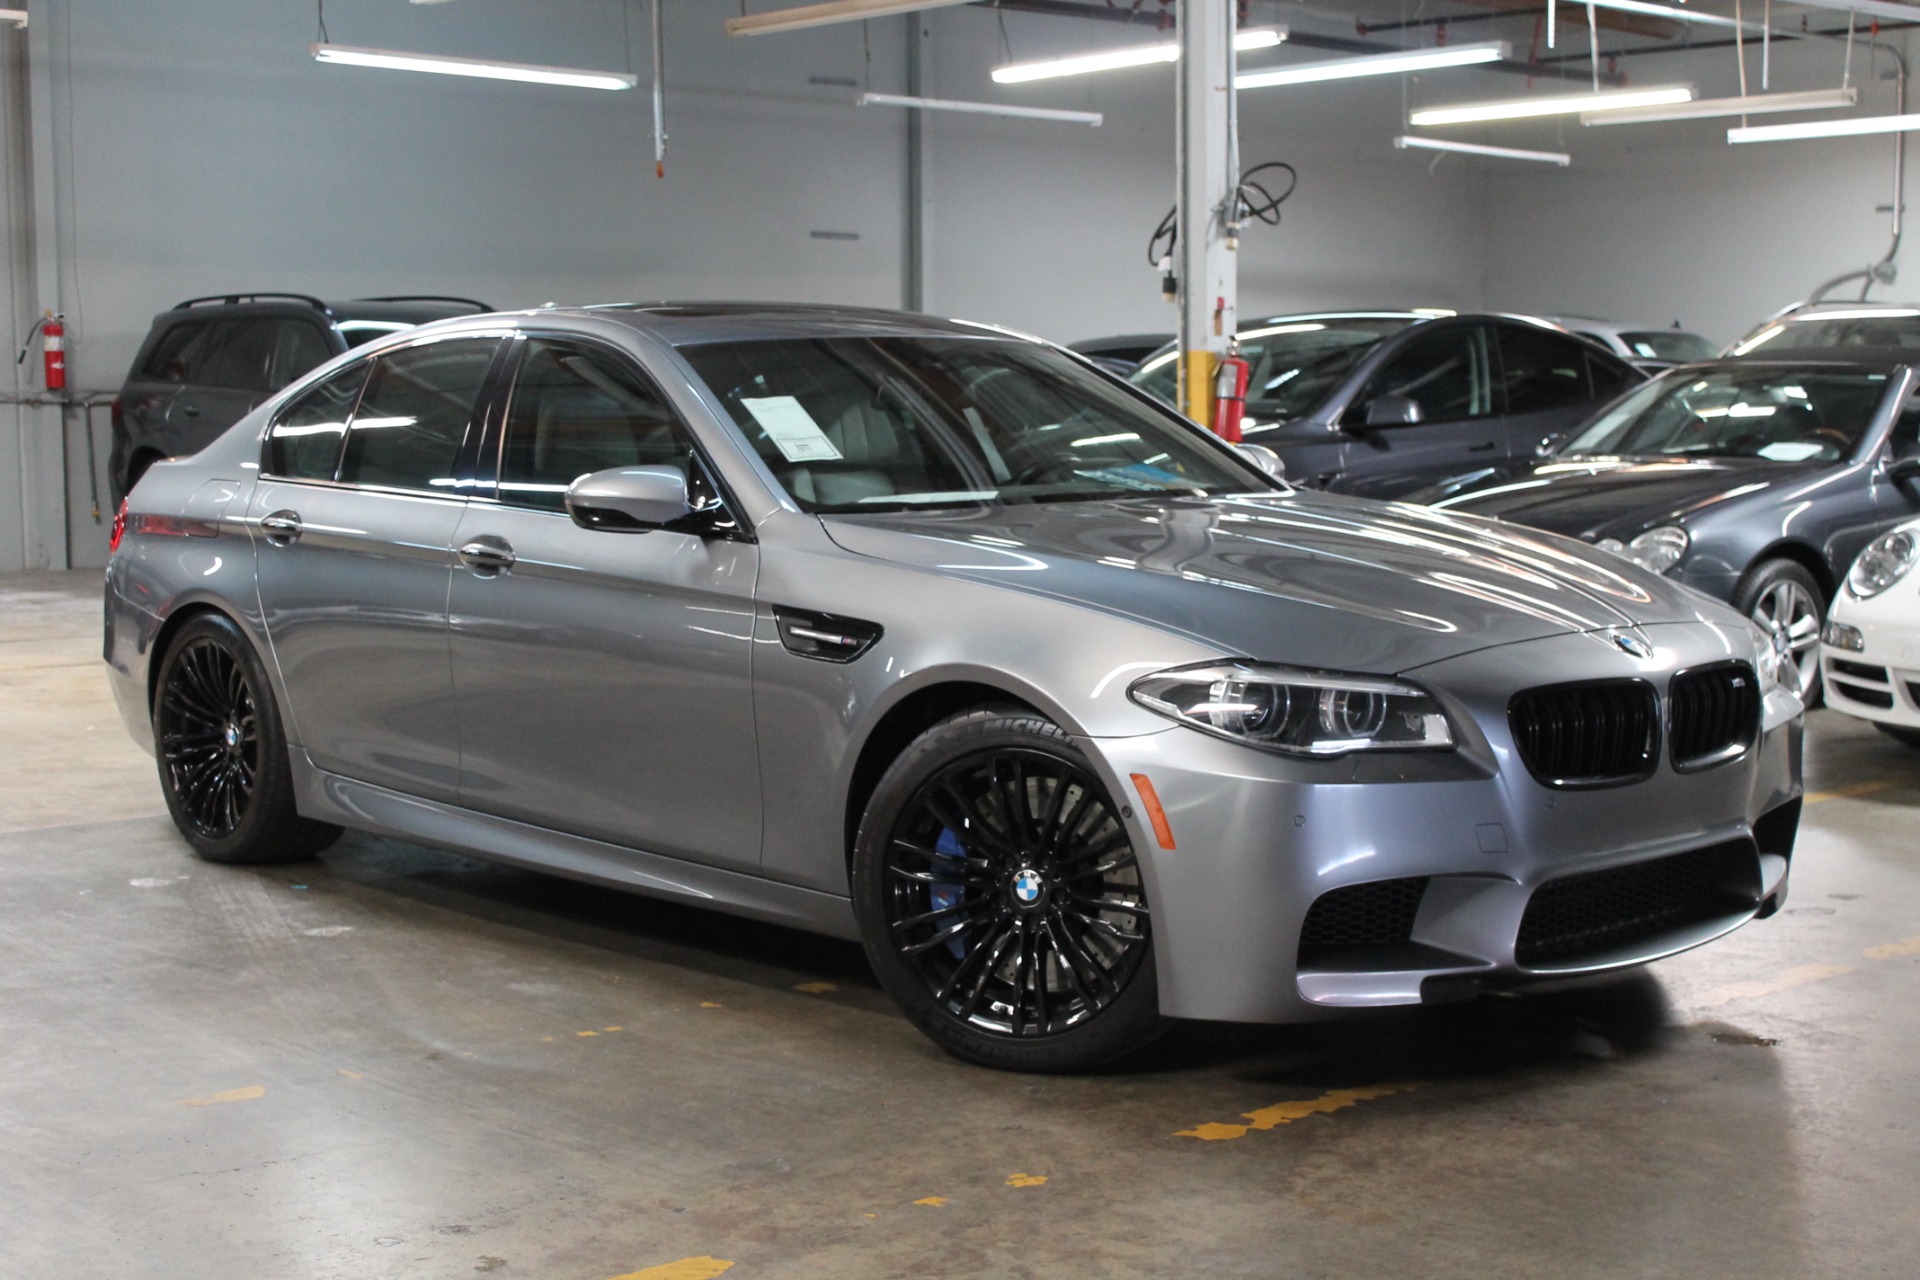 2015 BMW M5 for Sale